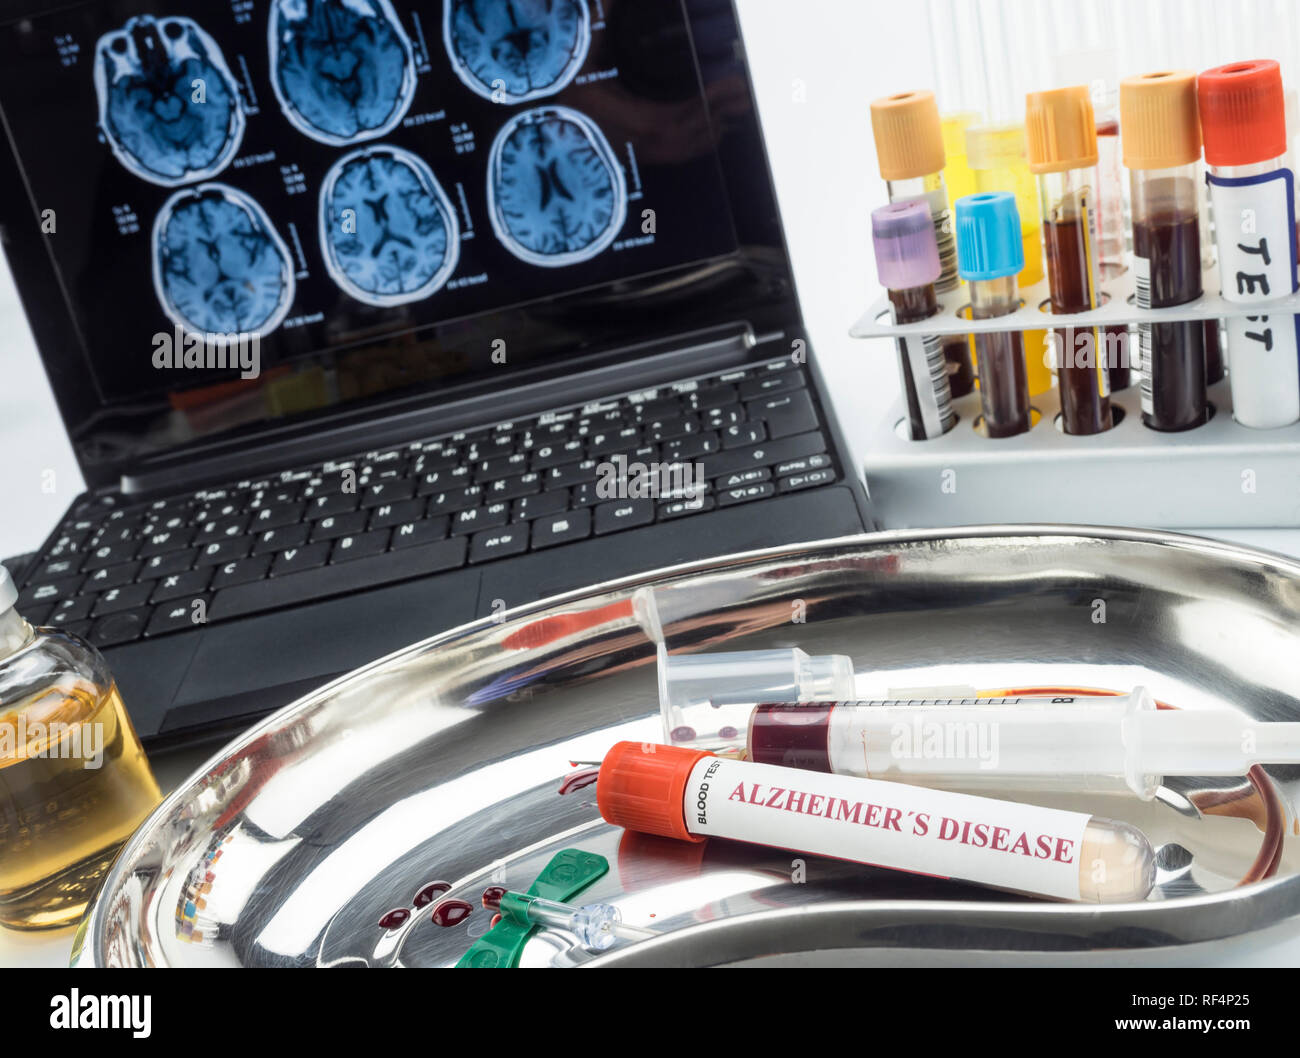 Blood sample to investigate remedy against Alzheimer disease, conceptual image Stock Photo